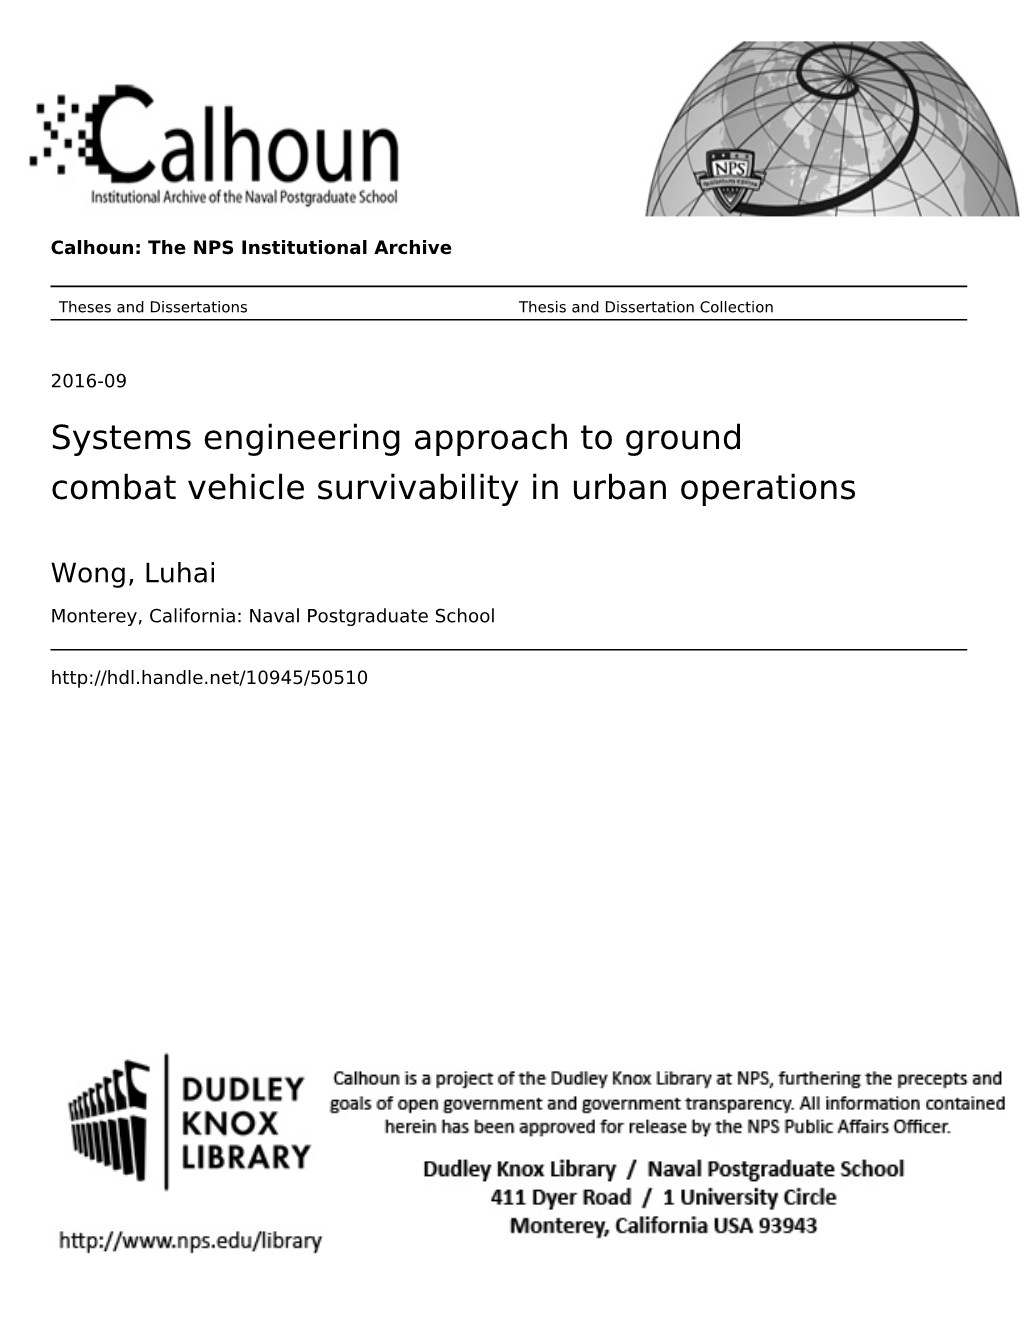 Systems Engineering Approach to Ground Combat Vehicle Survivability in Urban Operations